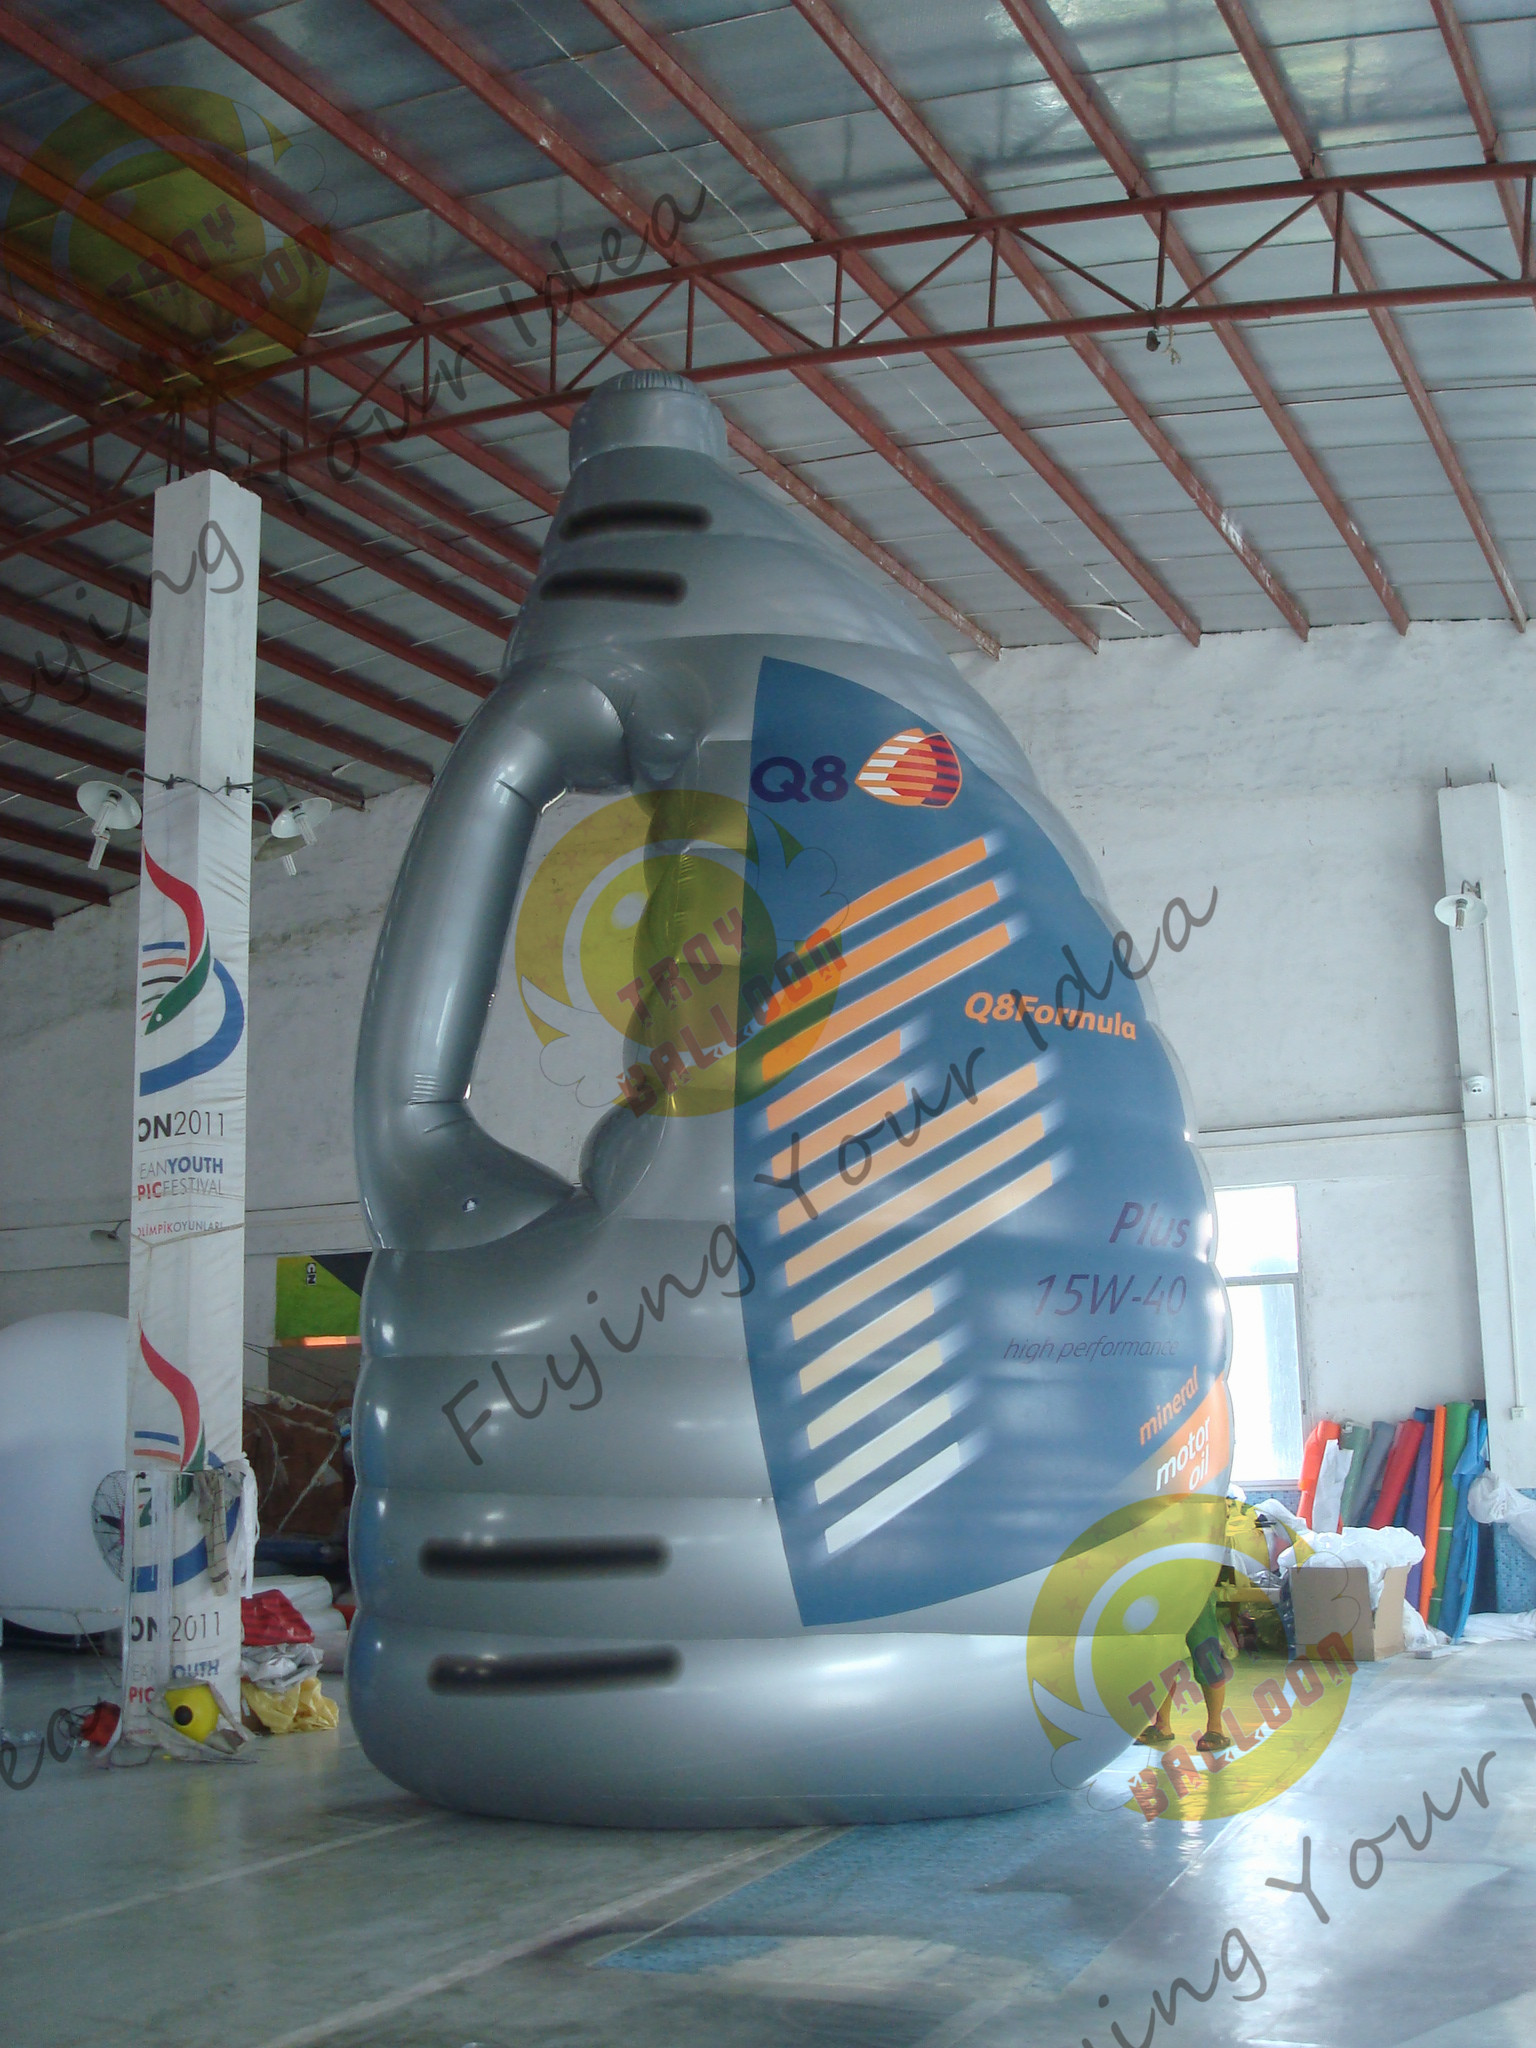  Blue Giant Tarpaulin Inflatable Product Replicas , Blow Up Bottle For Advertisement Manufactures